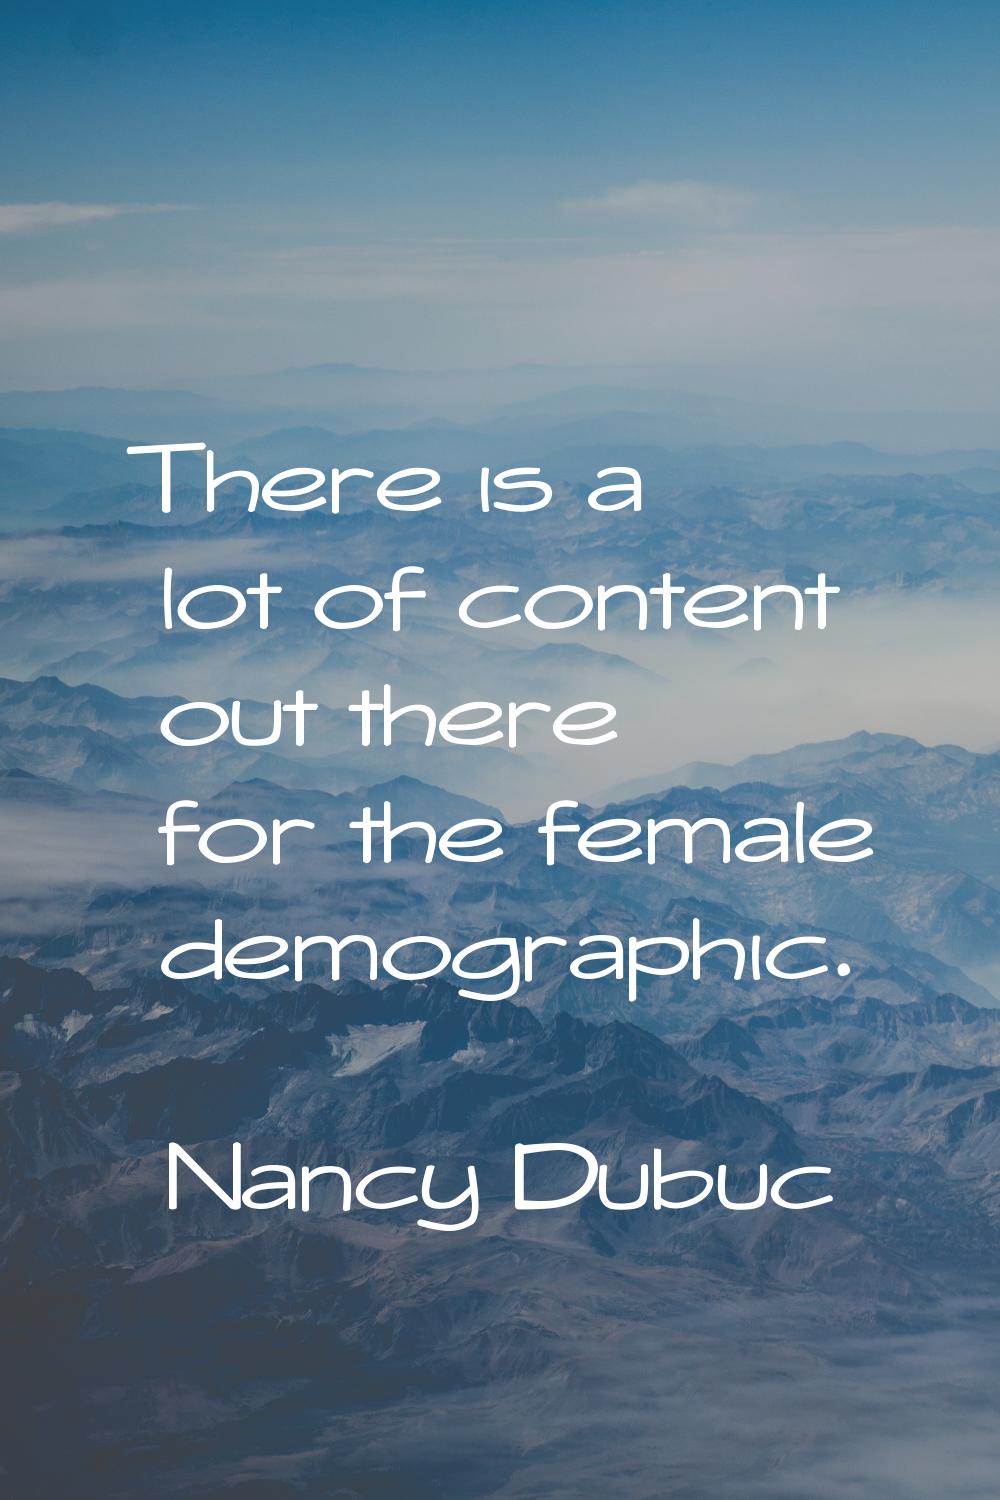 There is a lot of content out there for the female demographic.